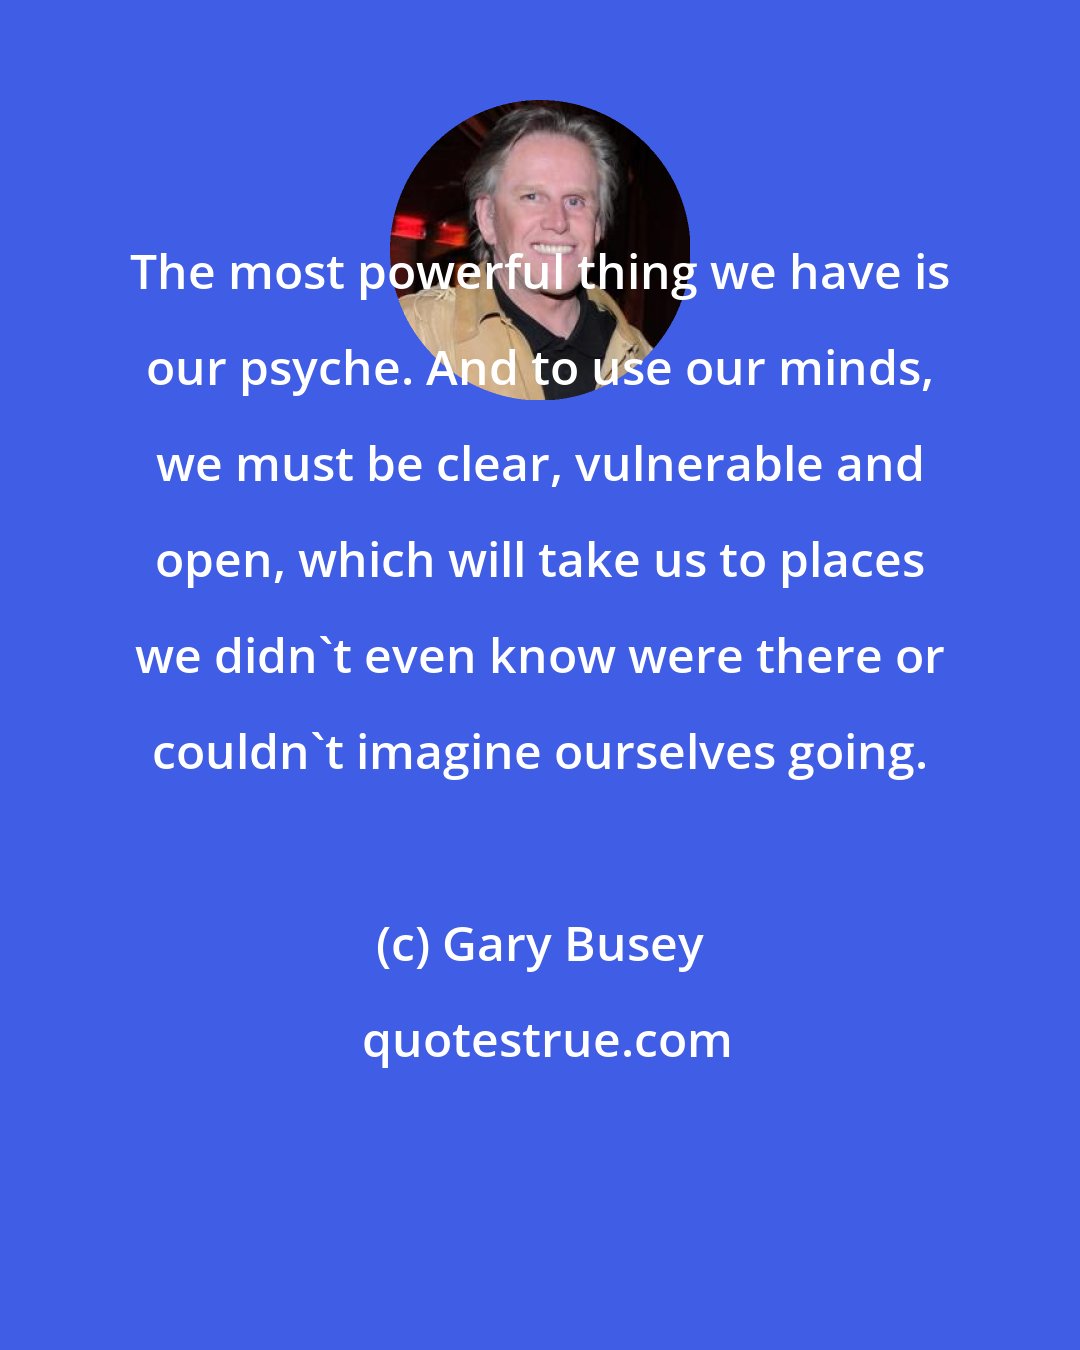 Gary Busey: The most powerful thing we have is our psyche. And to use our minds, we must be clear, vulnerable and open, which will take us to places we didn't even know were there or couldn't imagine ourselves going.